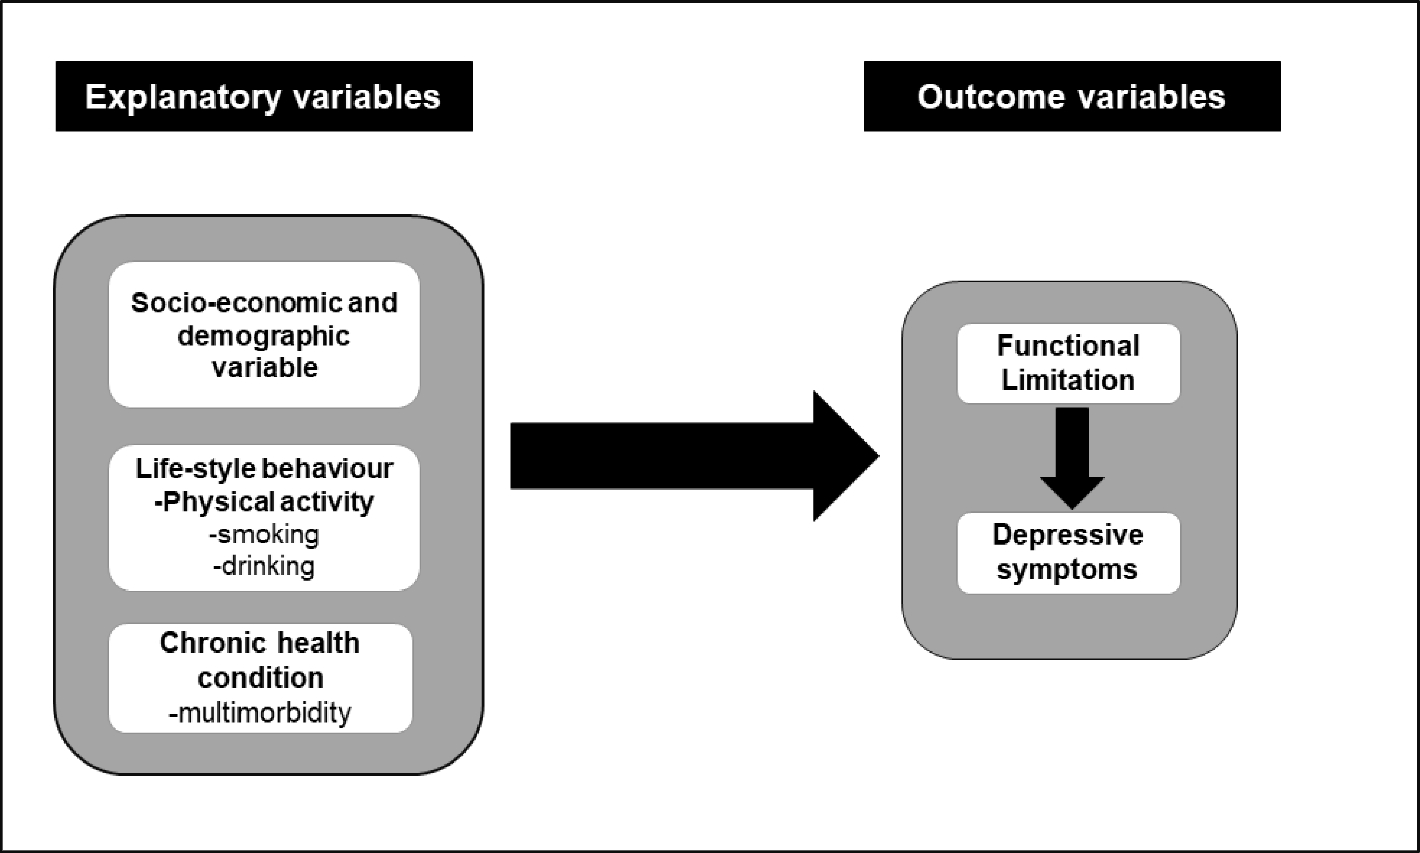 Functional Limitations and Depressive Symptoms among older people in India: Examining the Role of Physical Activity